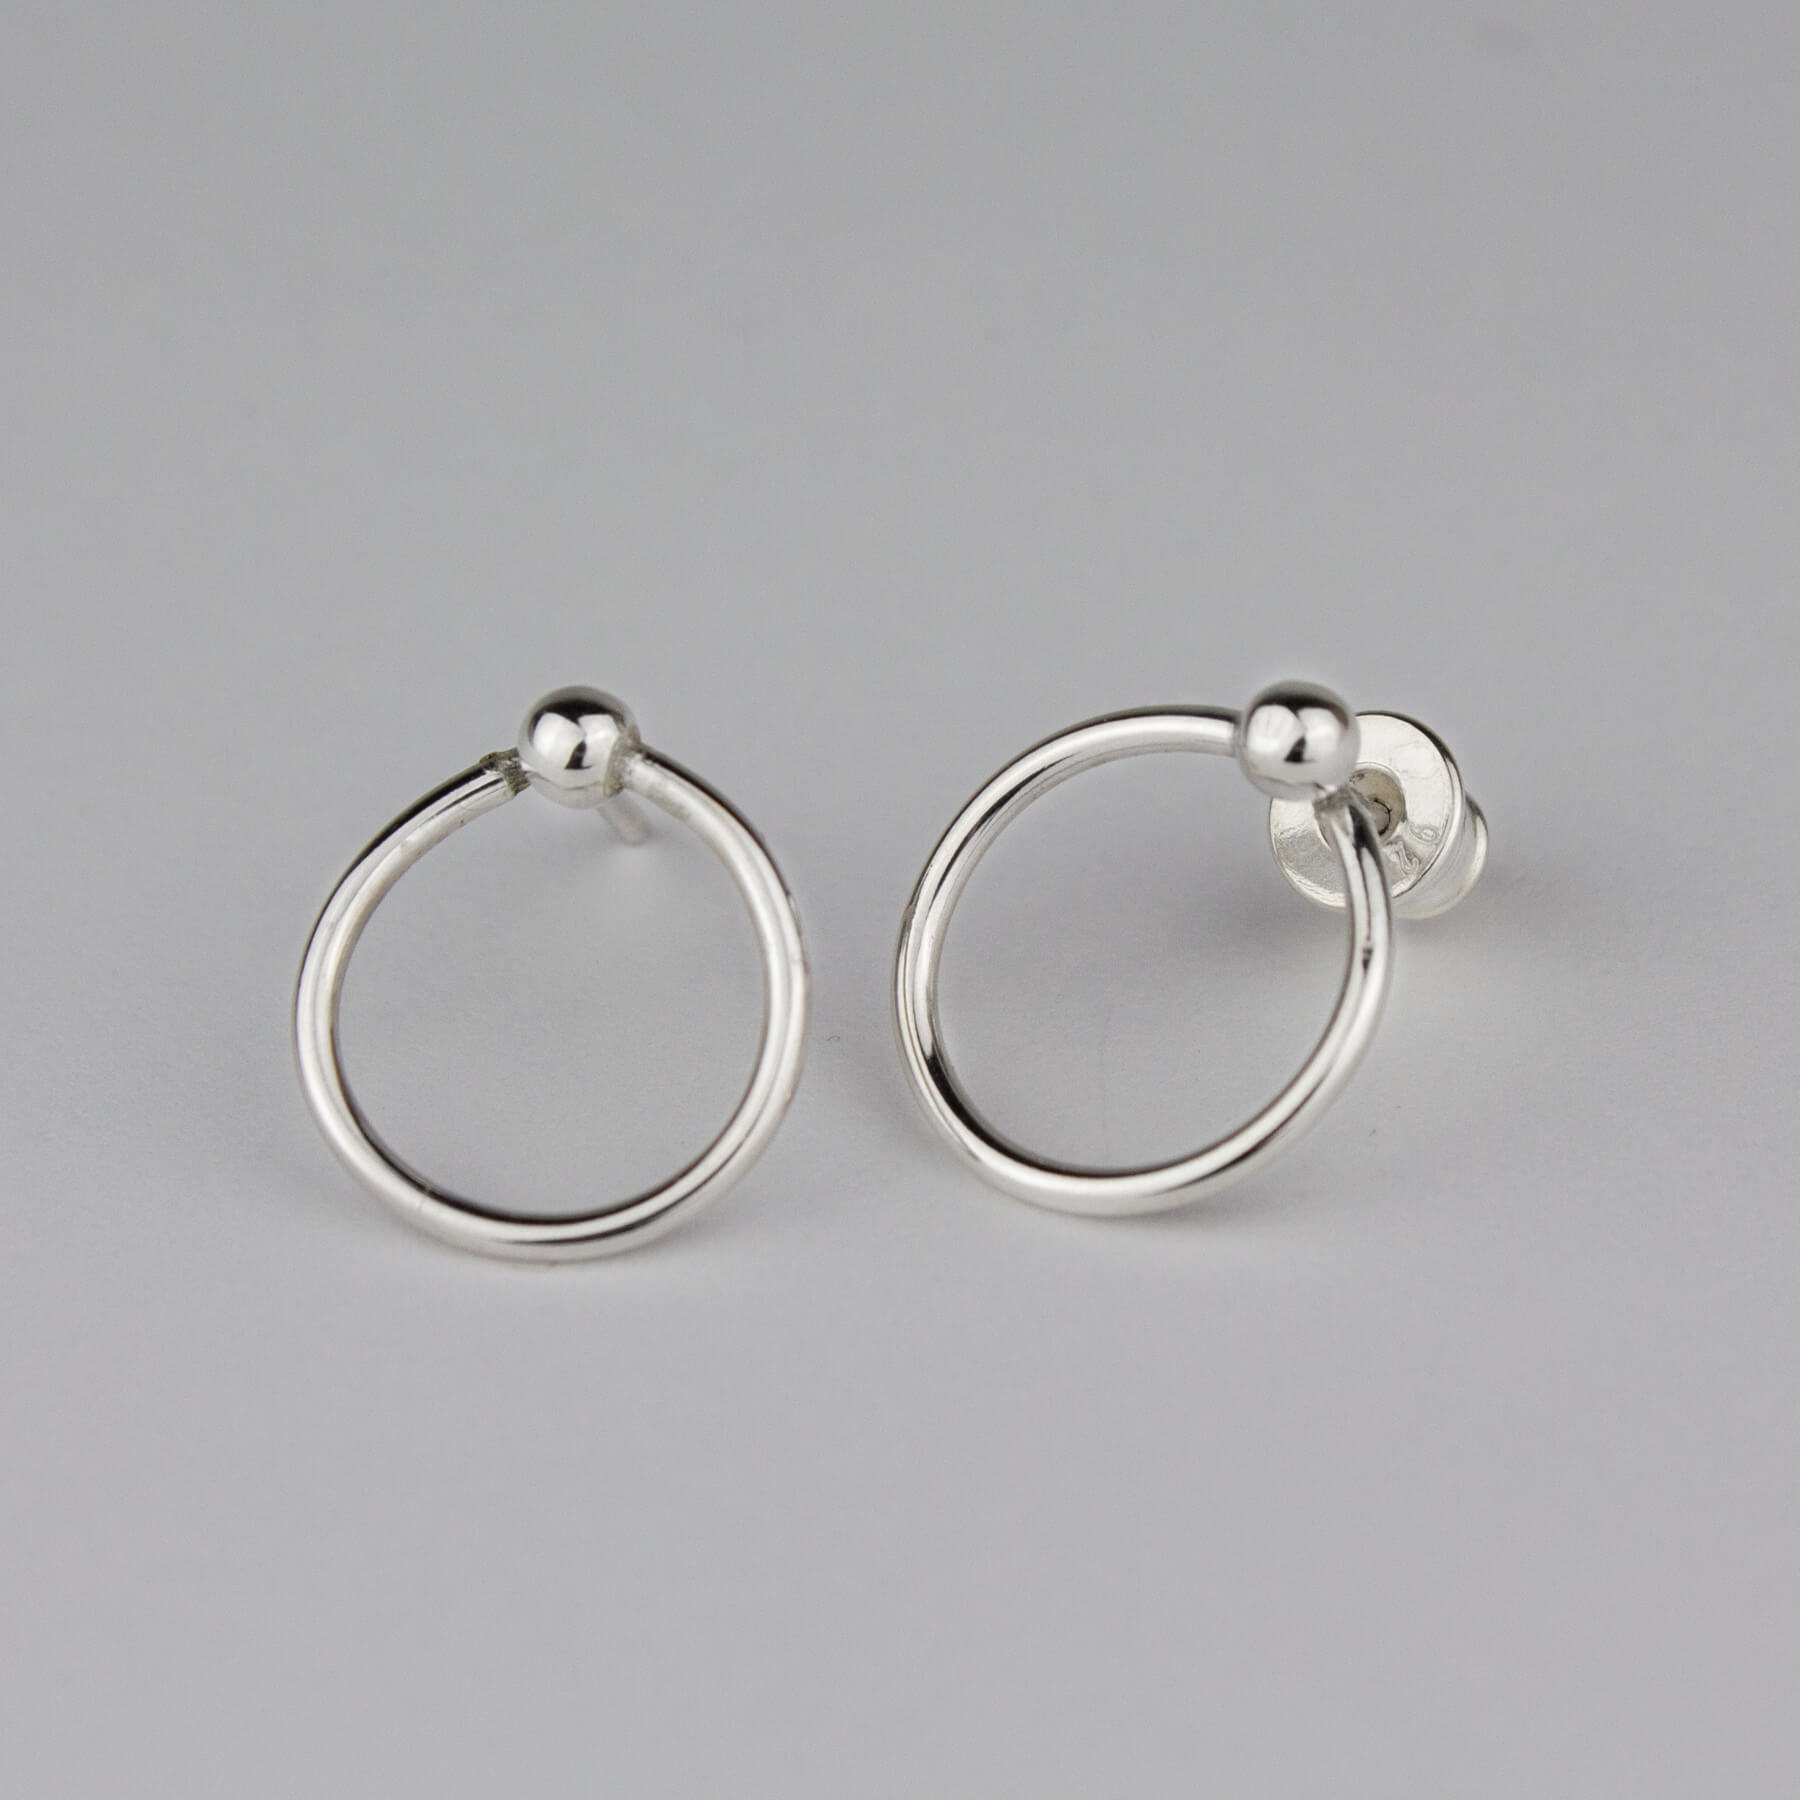 Small silver circle earrings on bright background